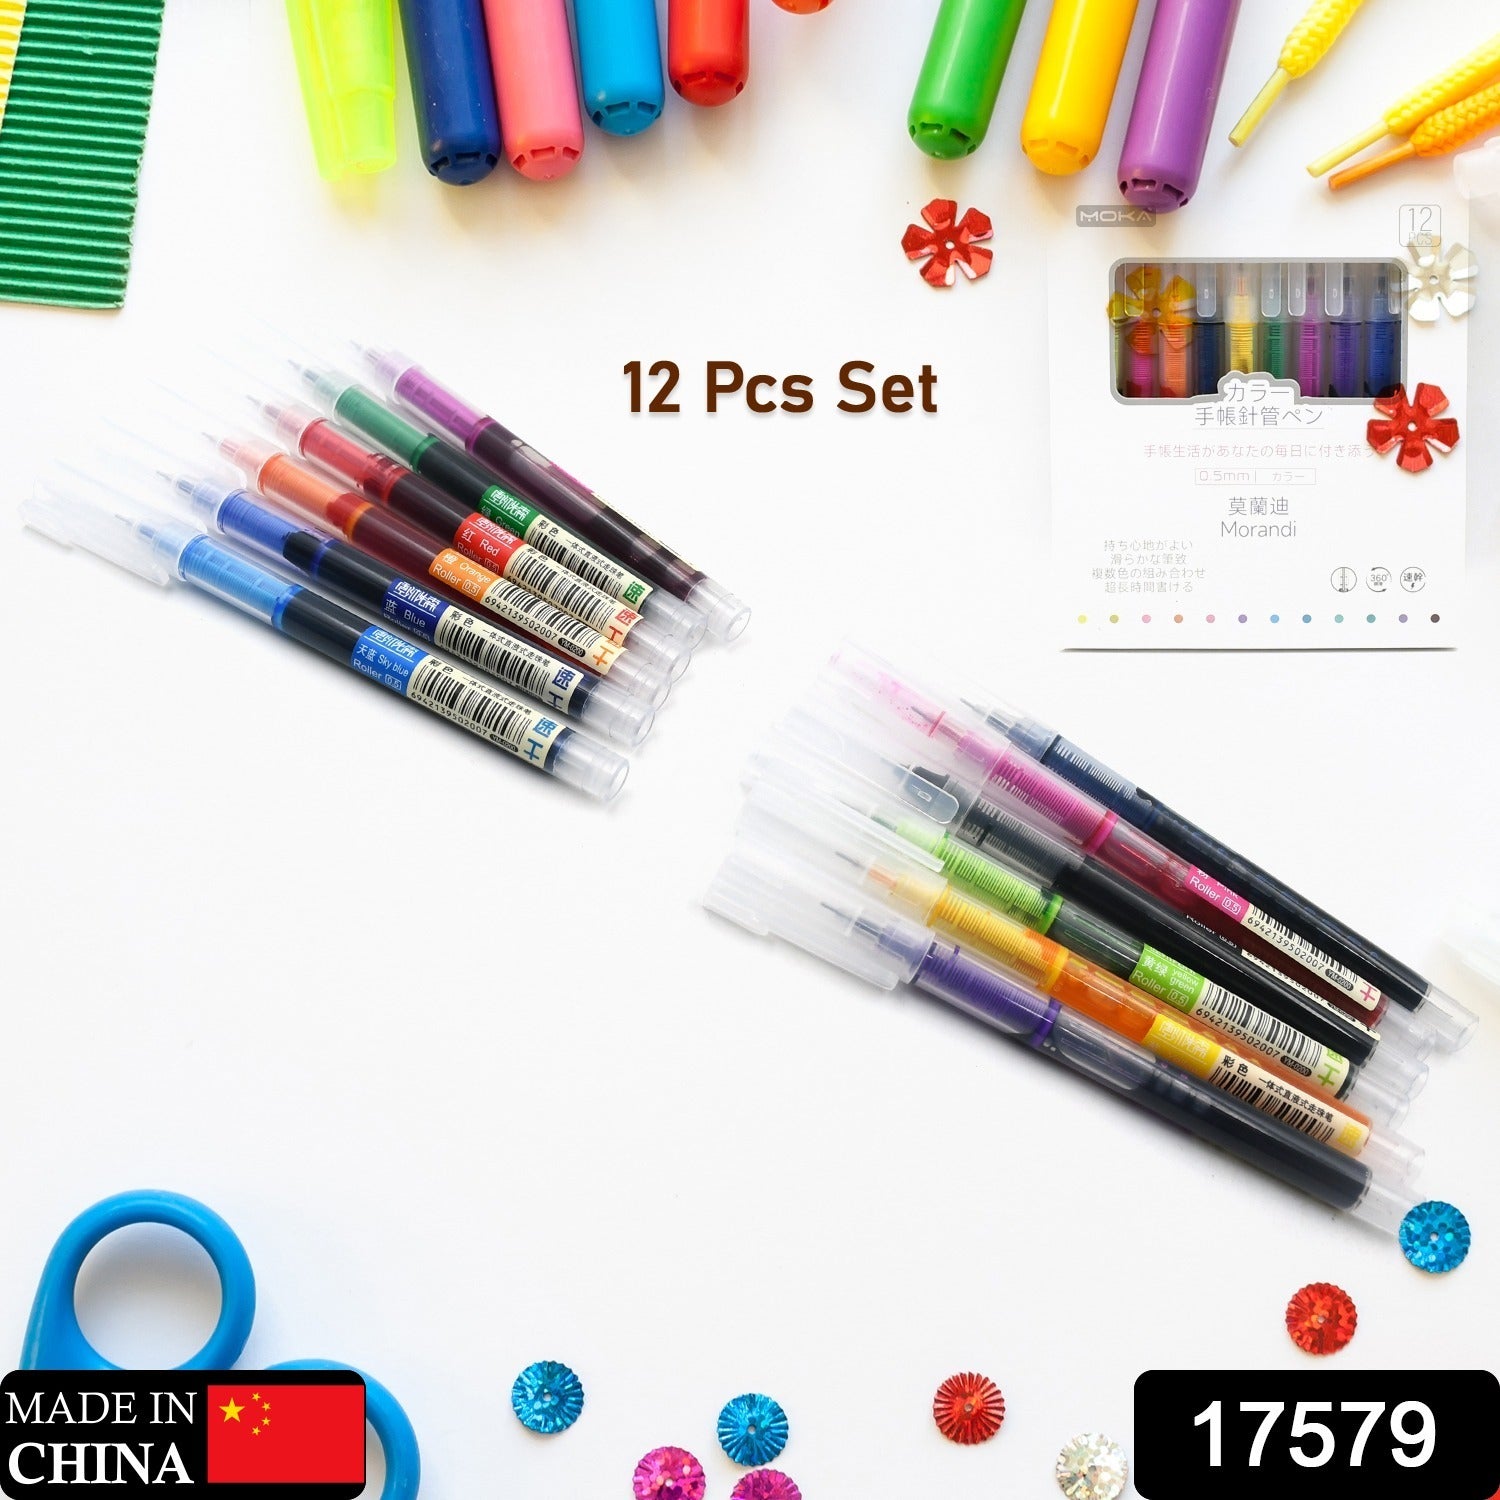 17579 12 Color Rolling Ball Pens, Quick-Drying Ink 0.5 mm Extra Fine Point Roller ball Pens Straight Liquid Gel Ink Pens for Writing, Drawing, Journaling, Taking Notes, School Office Stationery (12 Pcs Set)